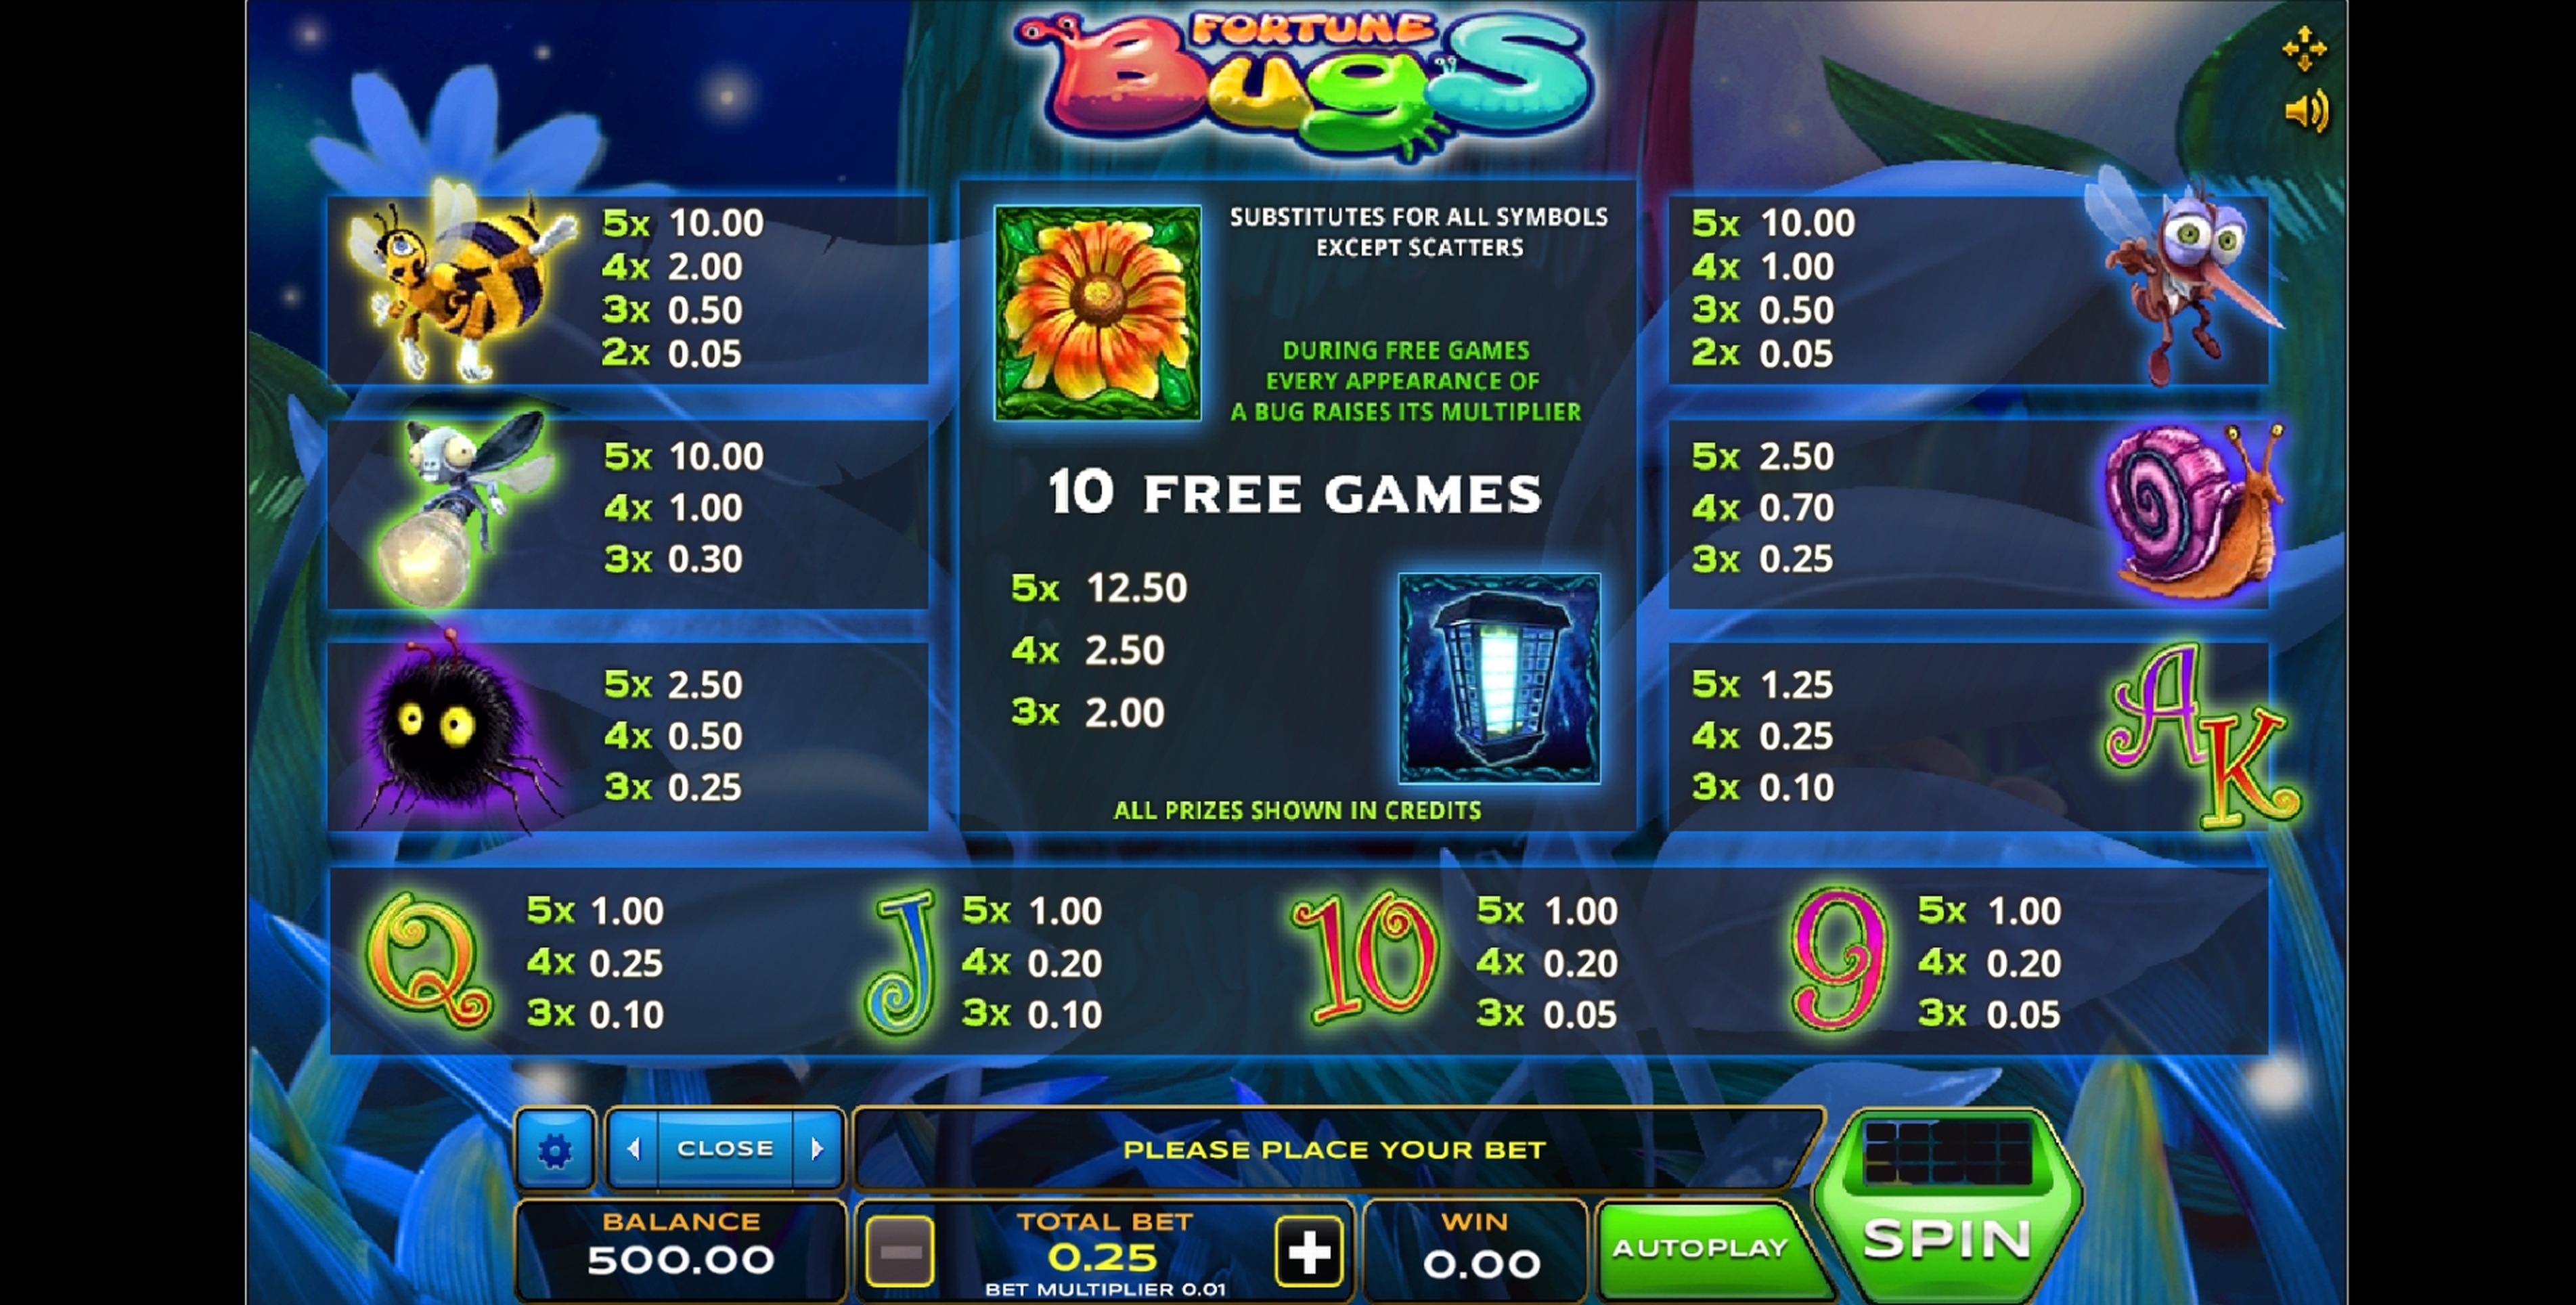 Info of Fortune Bugs Slot Game by Xplosive Slots Group